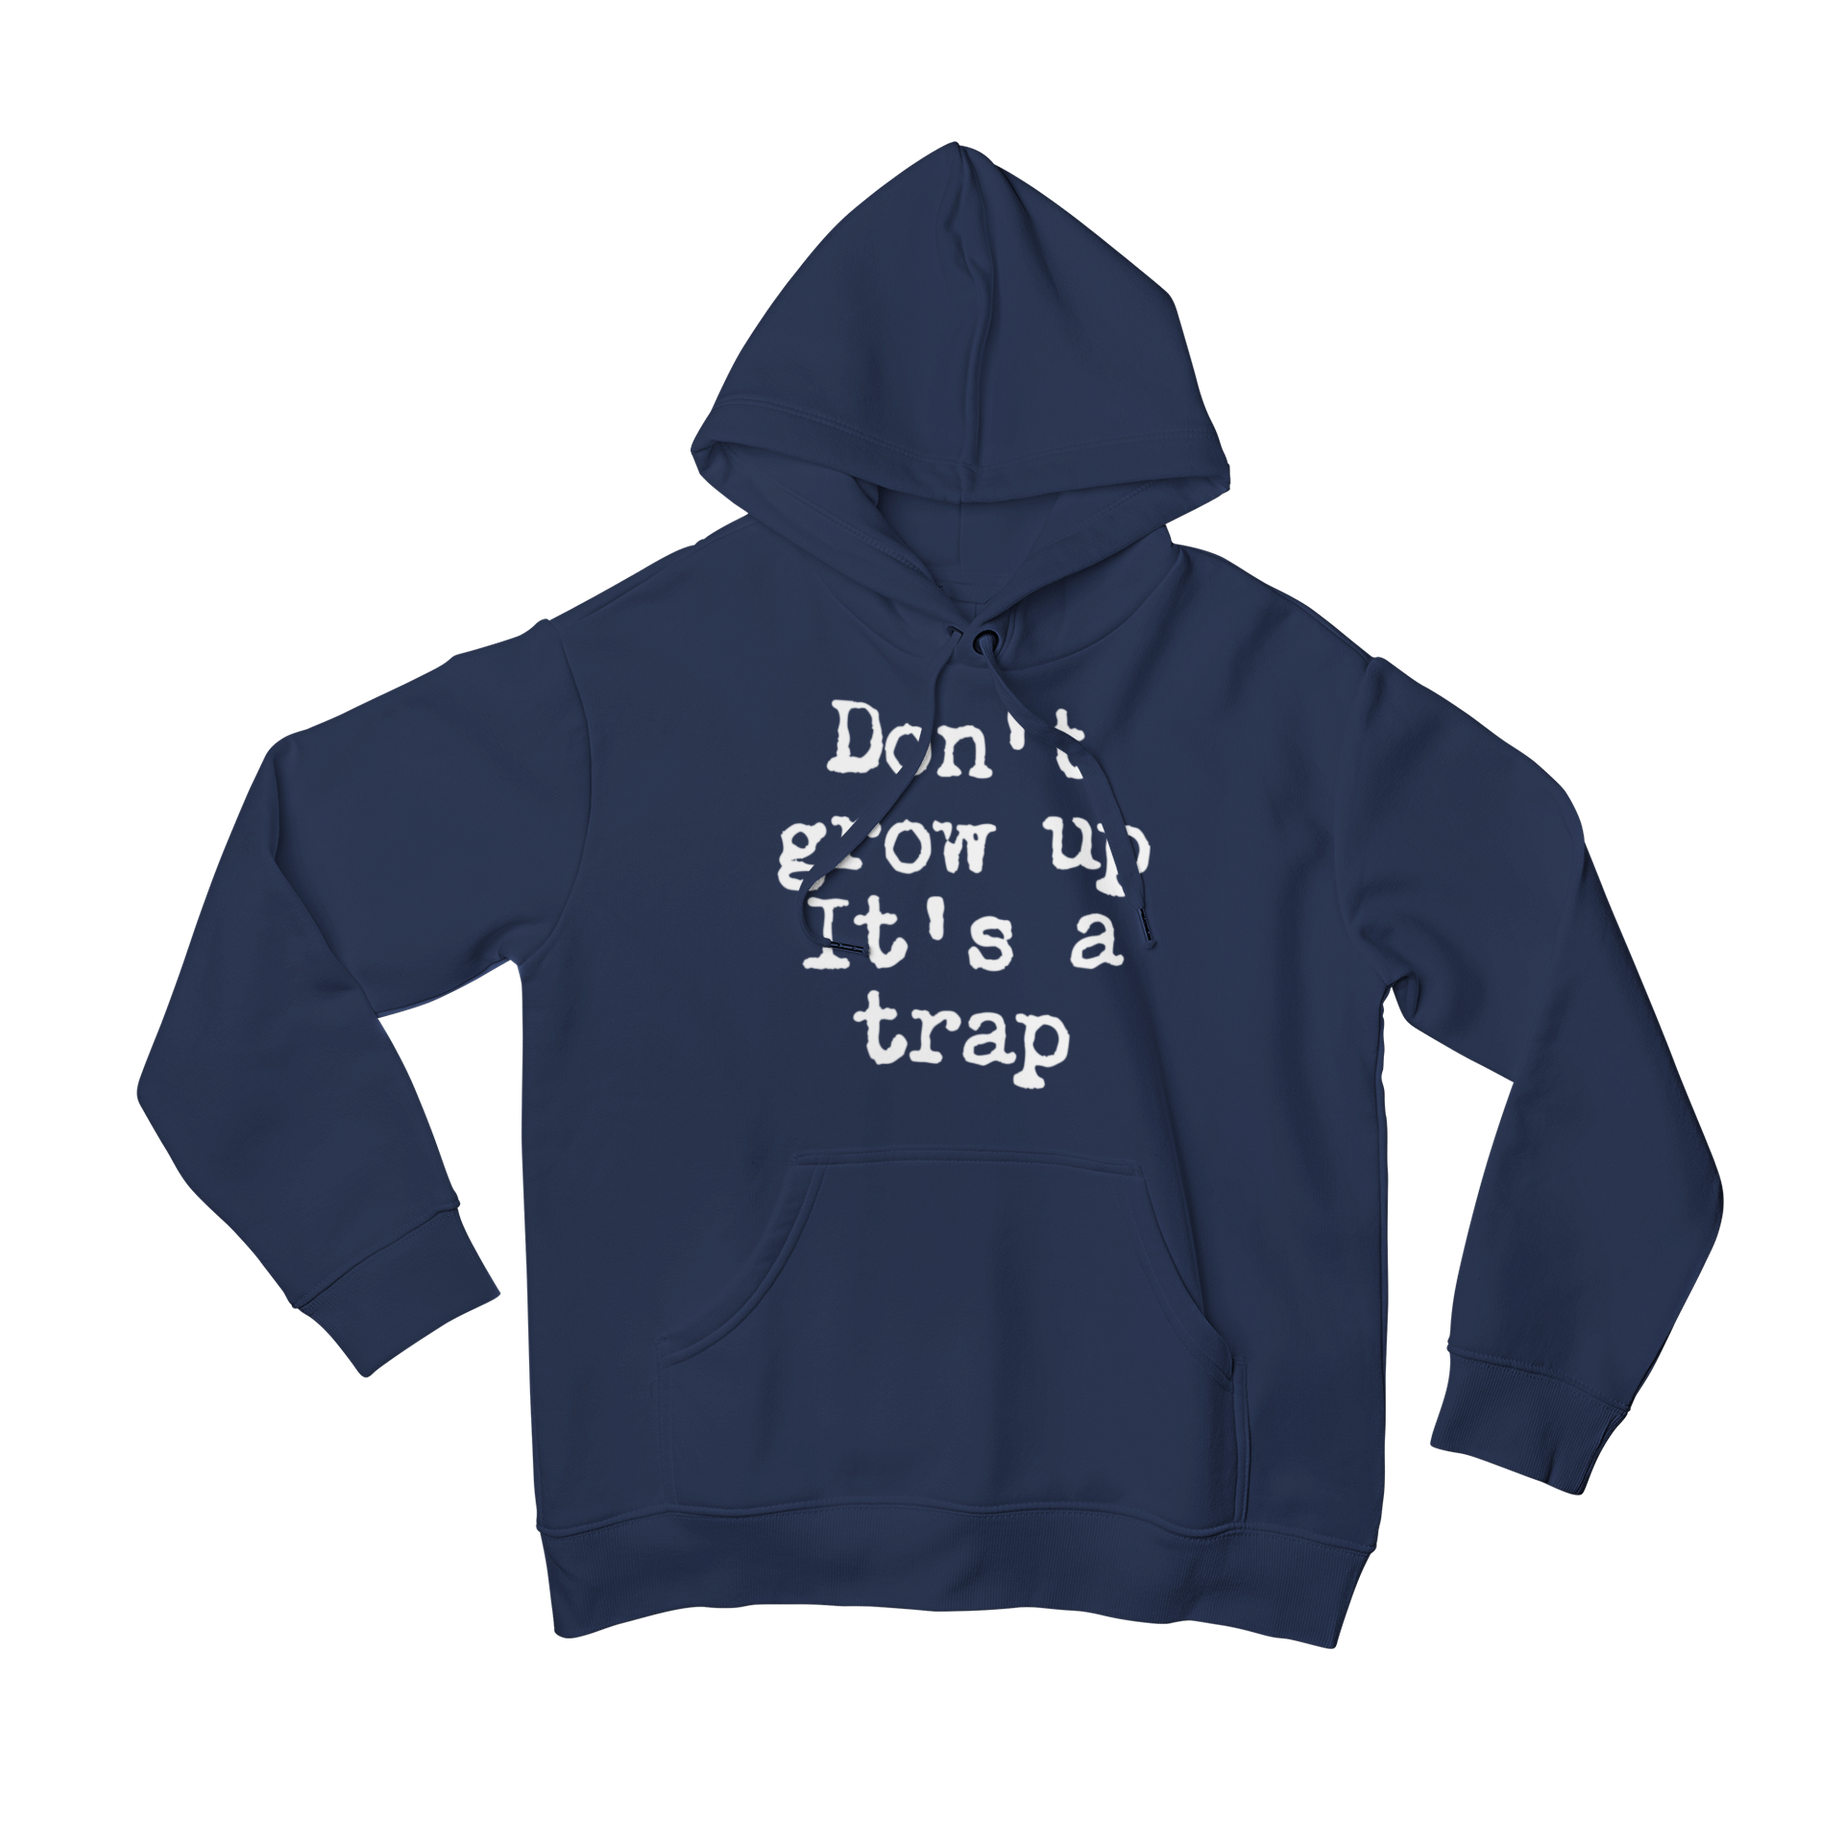 Stay young at heart with our Don't Grow Up Front Print Hoodie. Remind yourself and others that growing up is a trap with this playful slogan. Stay warm and stylish with this front print hoodie that's perfect for all ages. (Adulting not required)